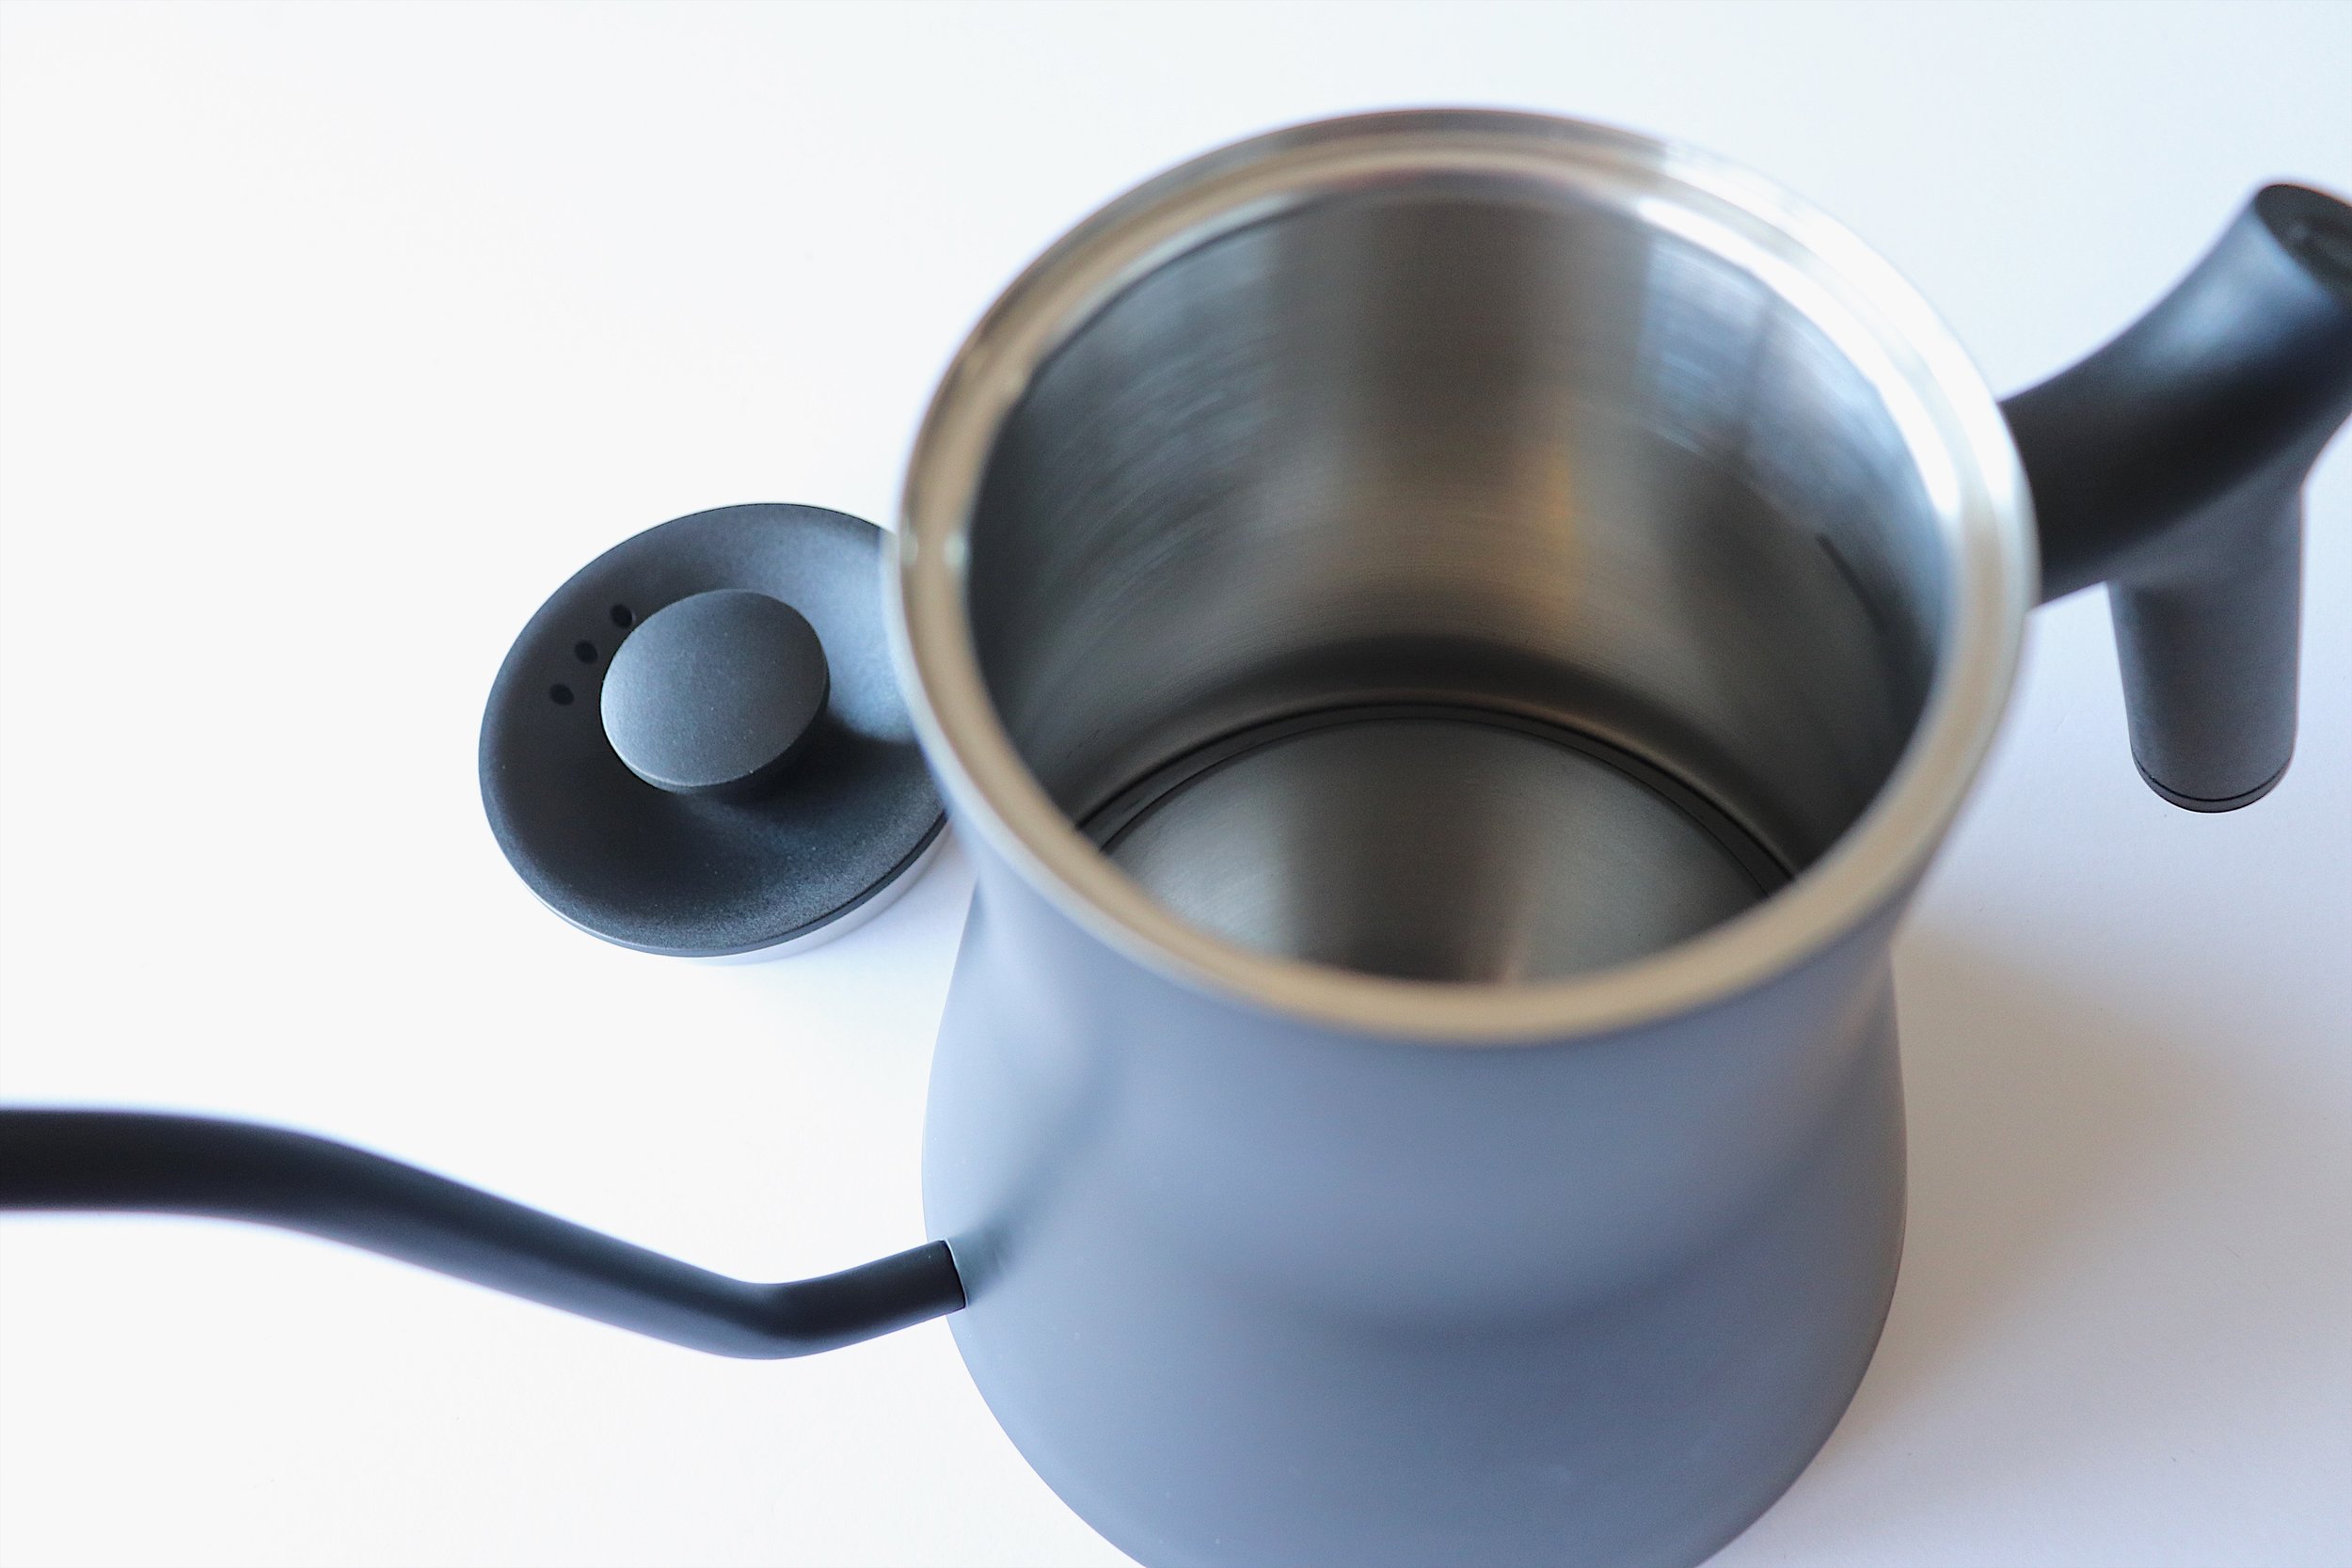 stagg electric pour over kettle